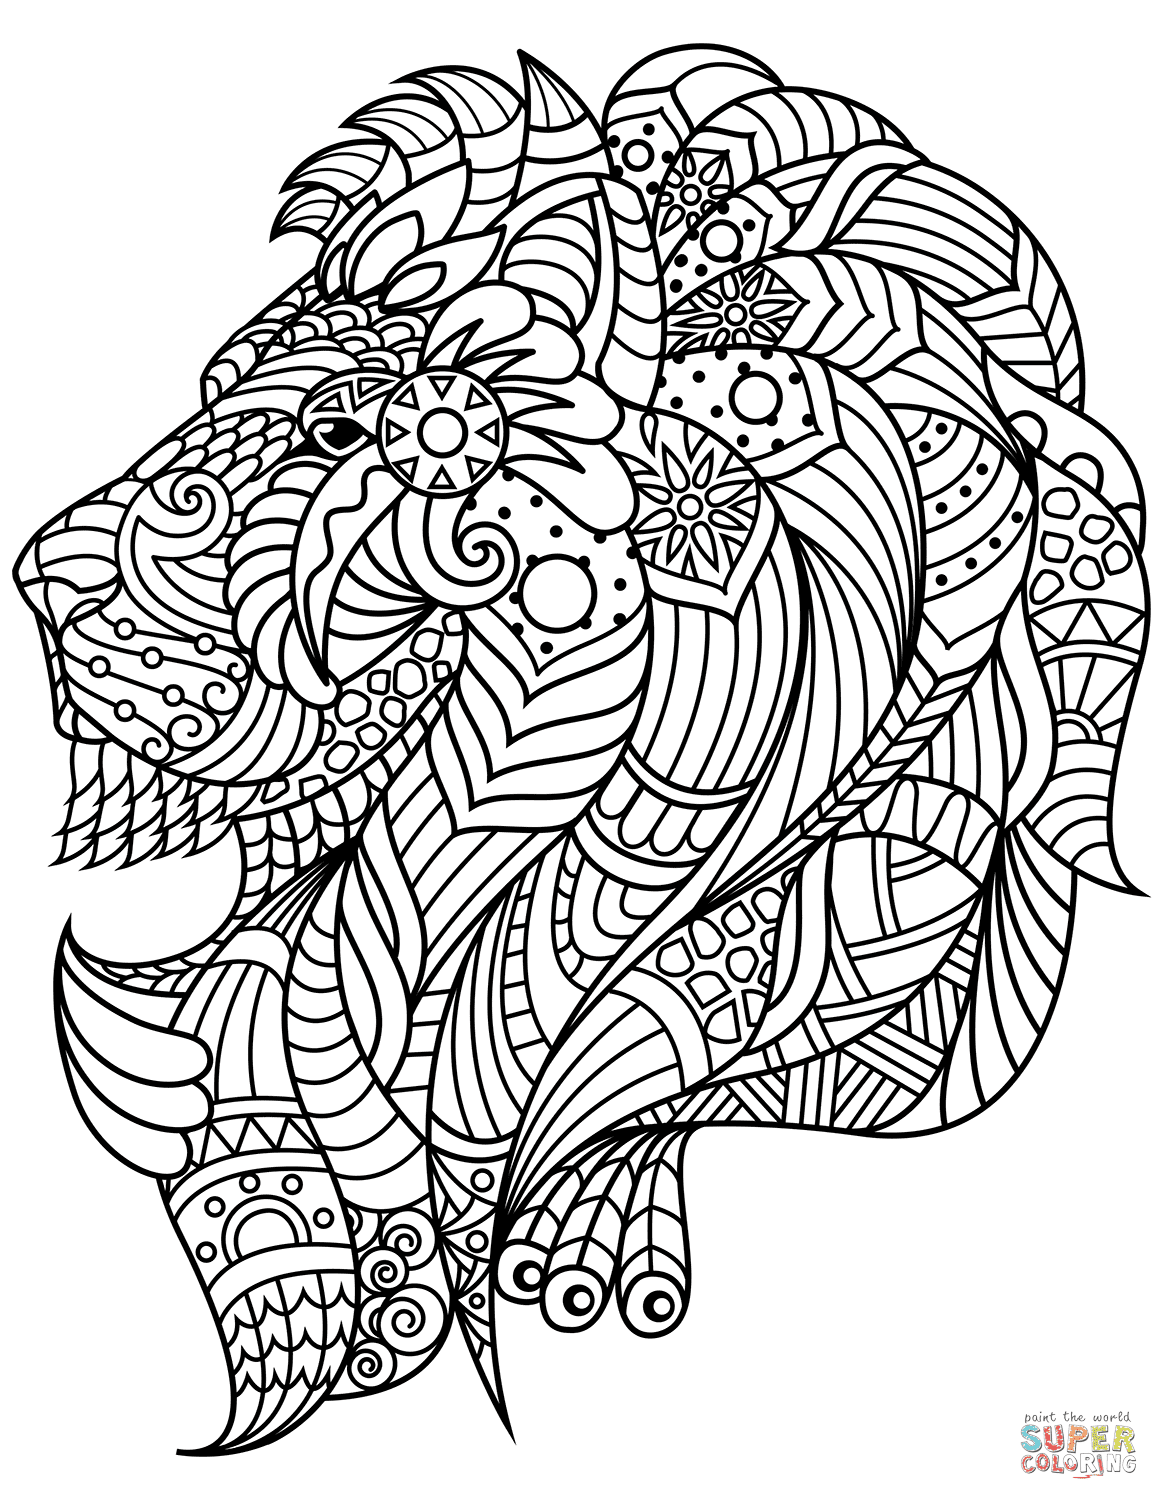 Children love stories of wild animals. Lion Head Zentangle Coloring Page Free Printable Coloring Pages